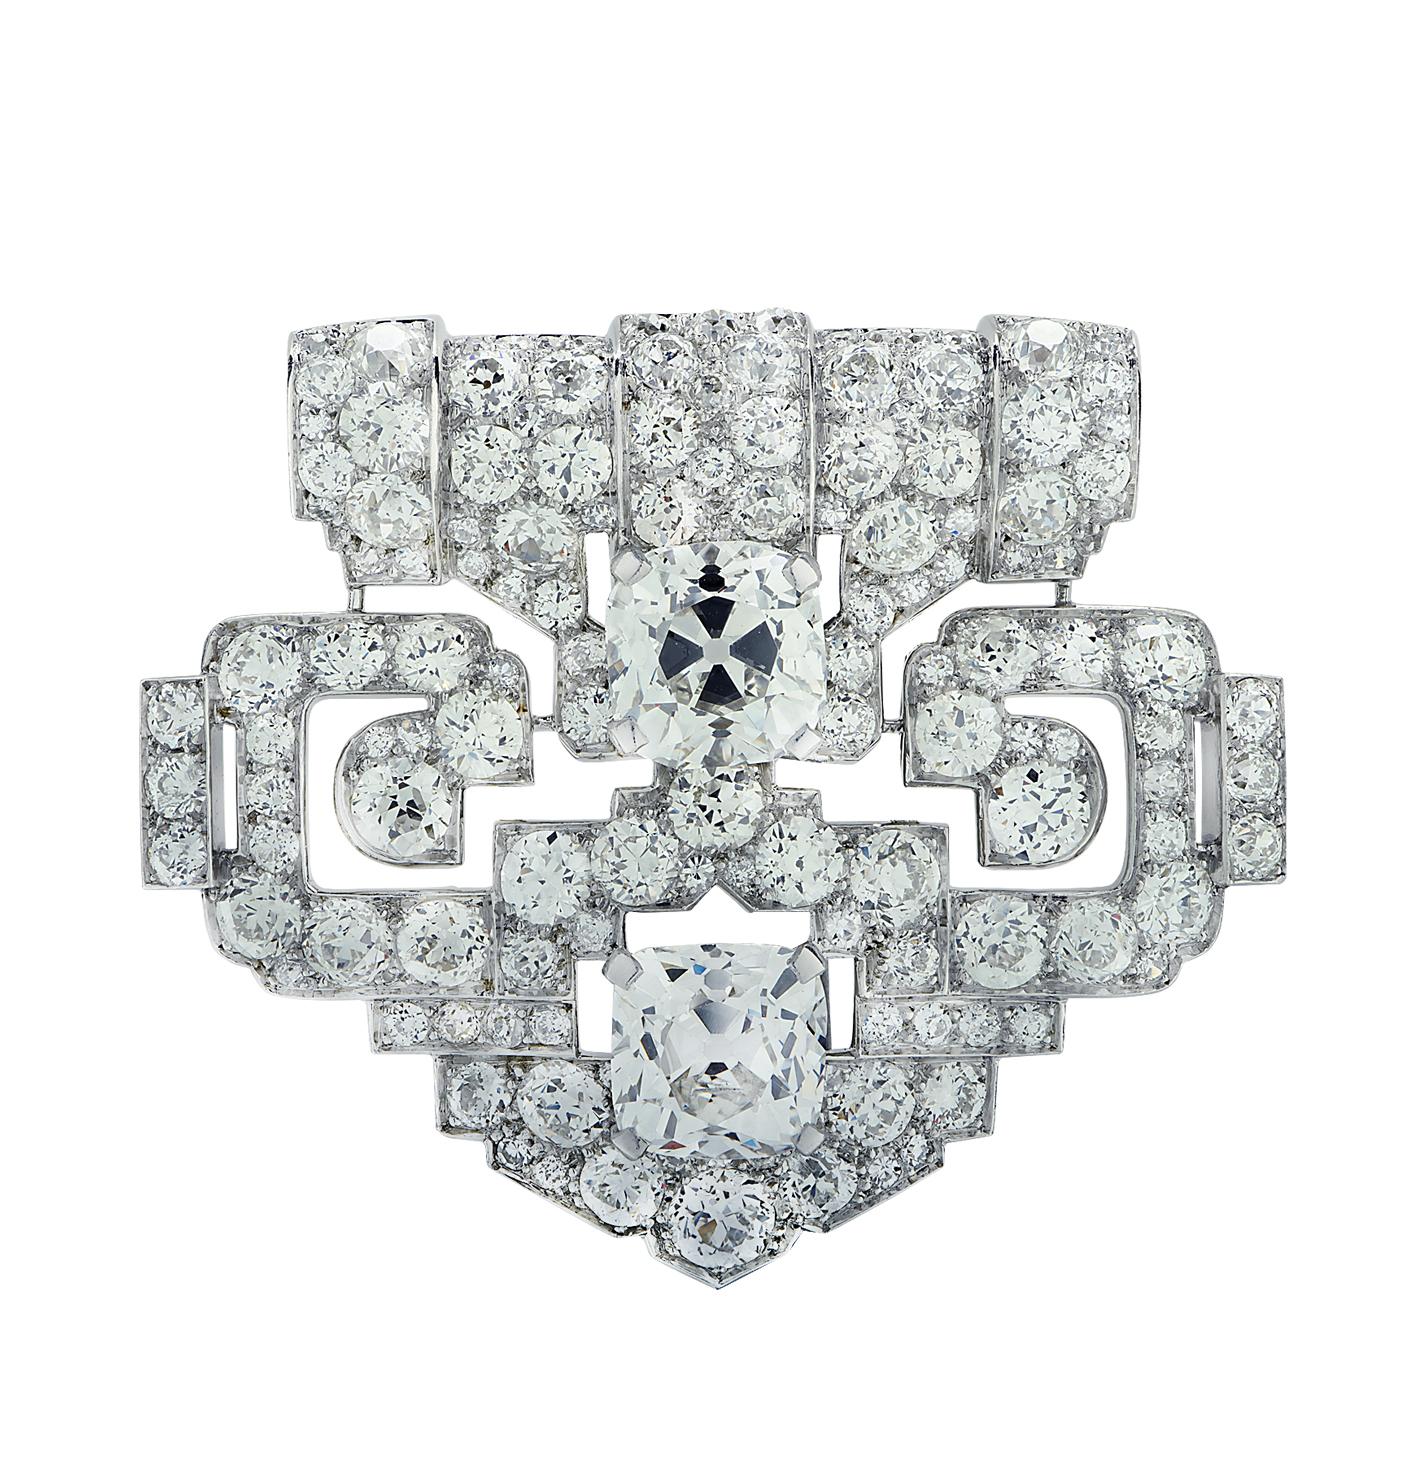 Women's Cartier New York GIA Certified 11.24 Carat Old Mine Cushion Diamond Brooch For Sale